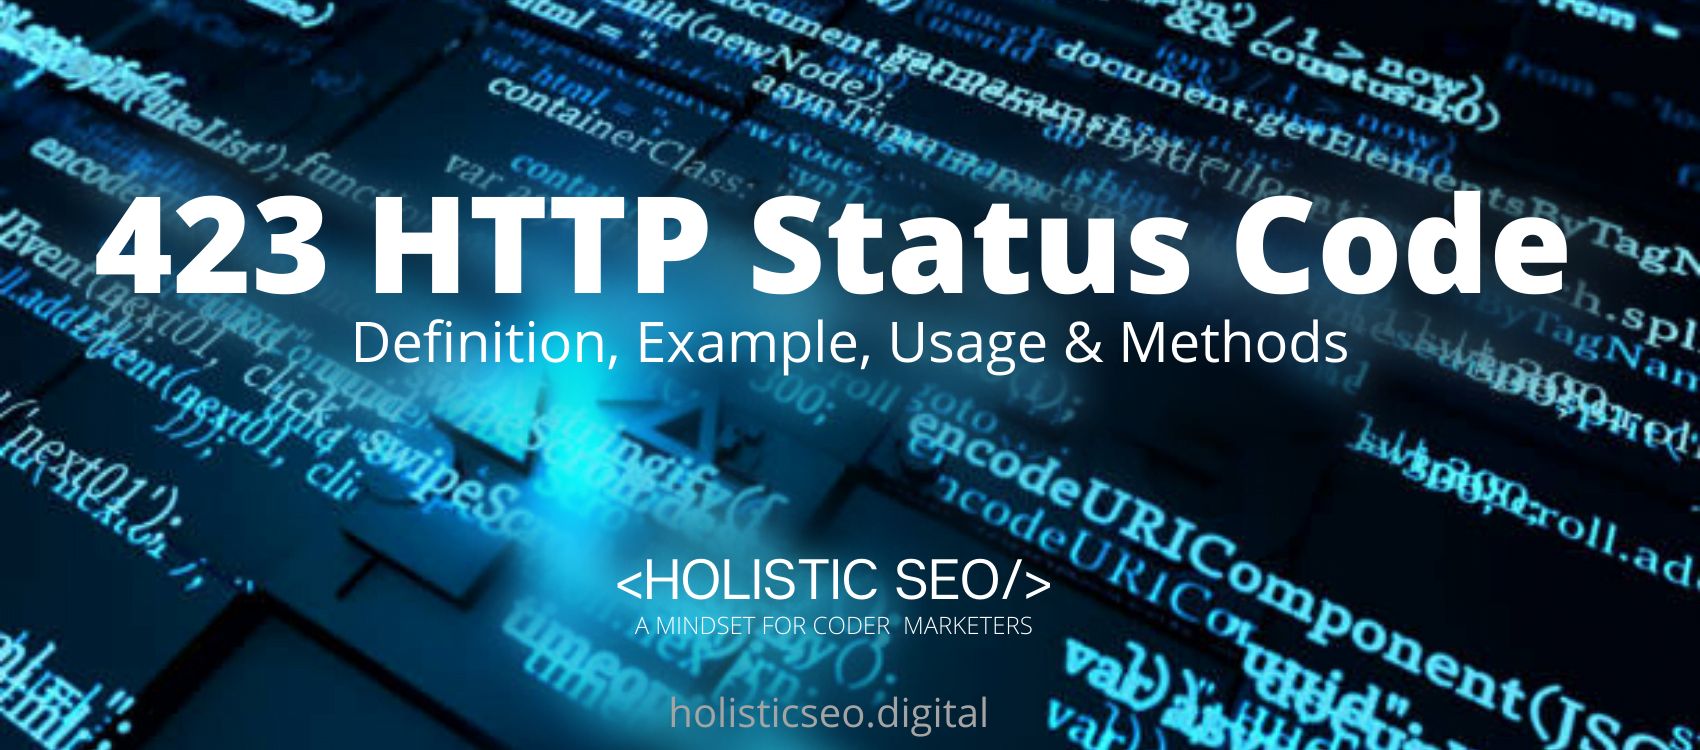 HTTP Status Codes That Will Make You Think - DEV Community